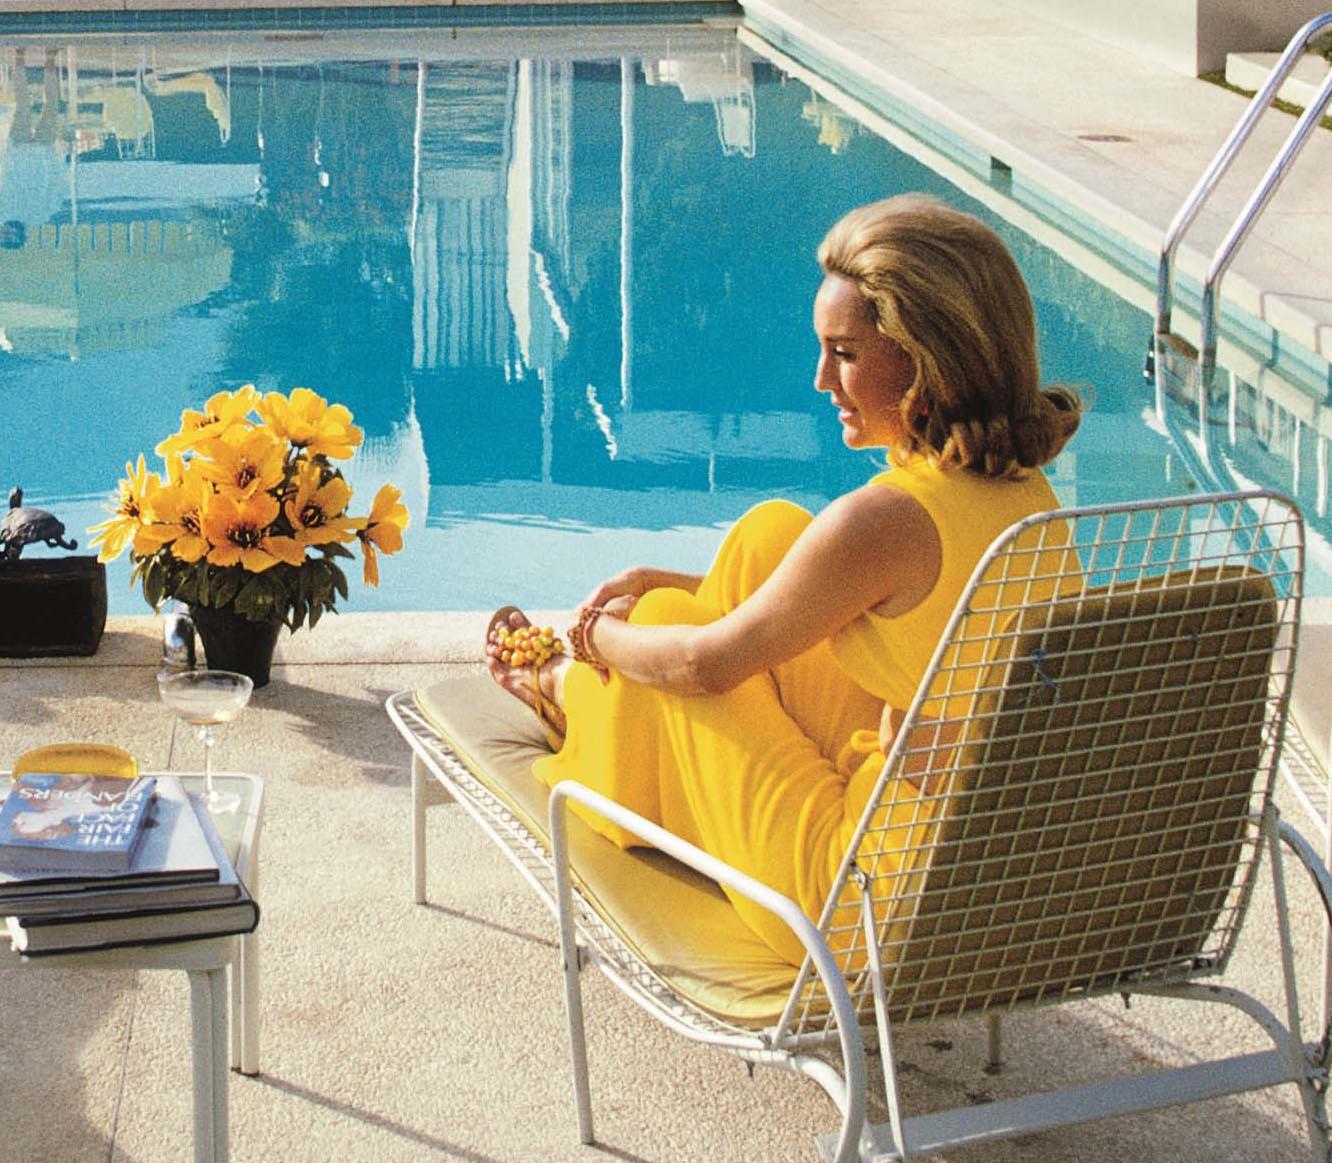 Framed Poolside Glamour - Photograph by Slim Aarons